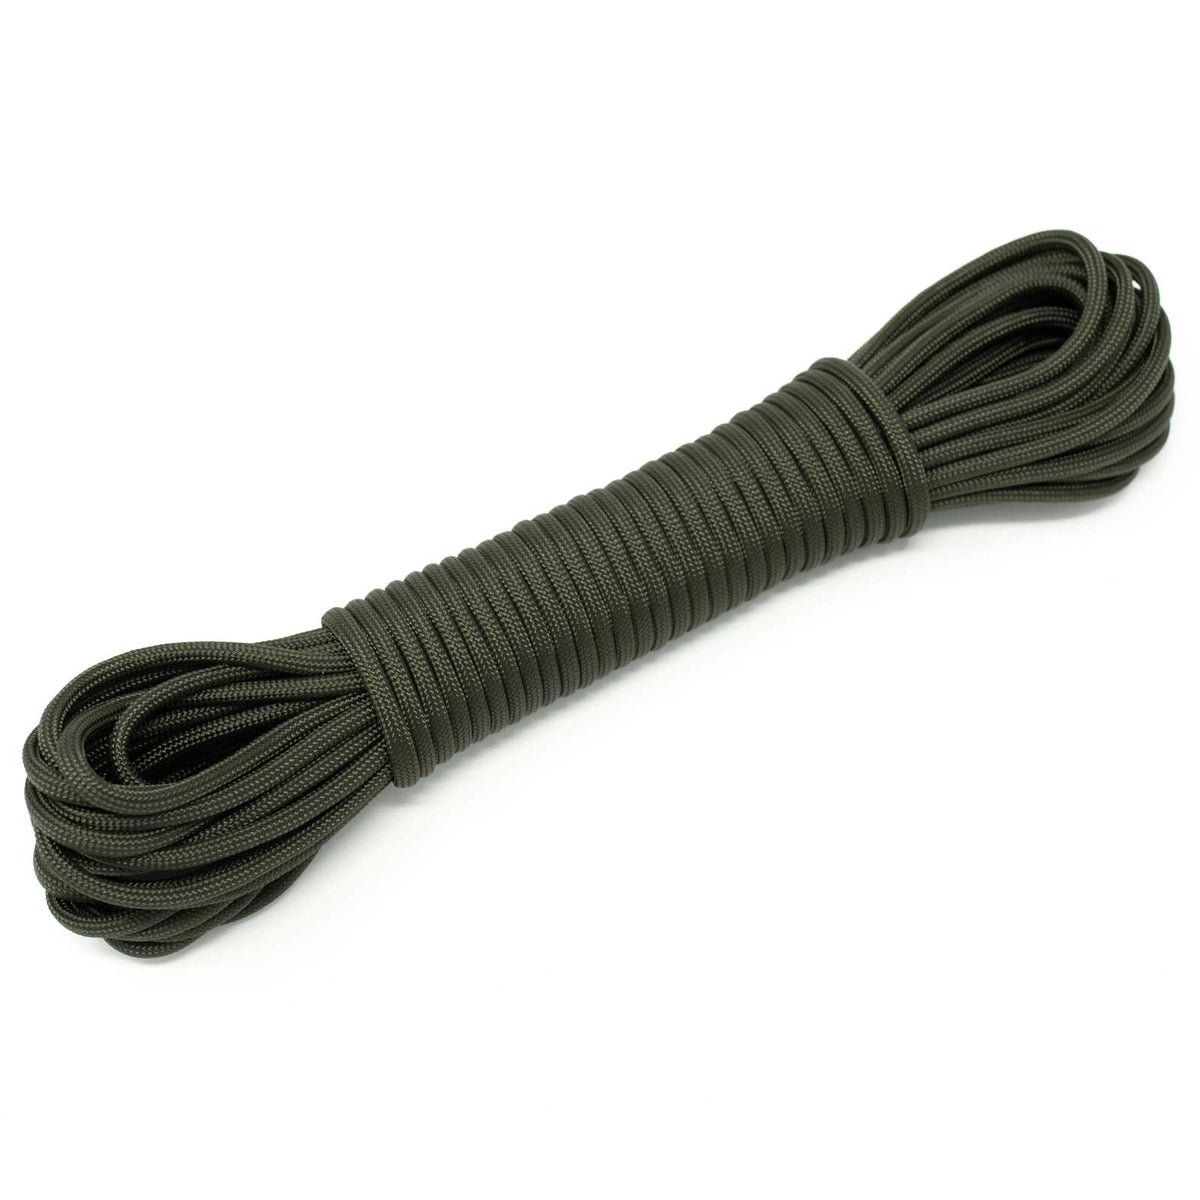 7 strand 550 Paracord 50 ft OD Green